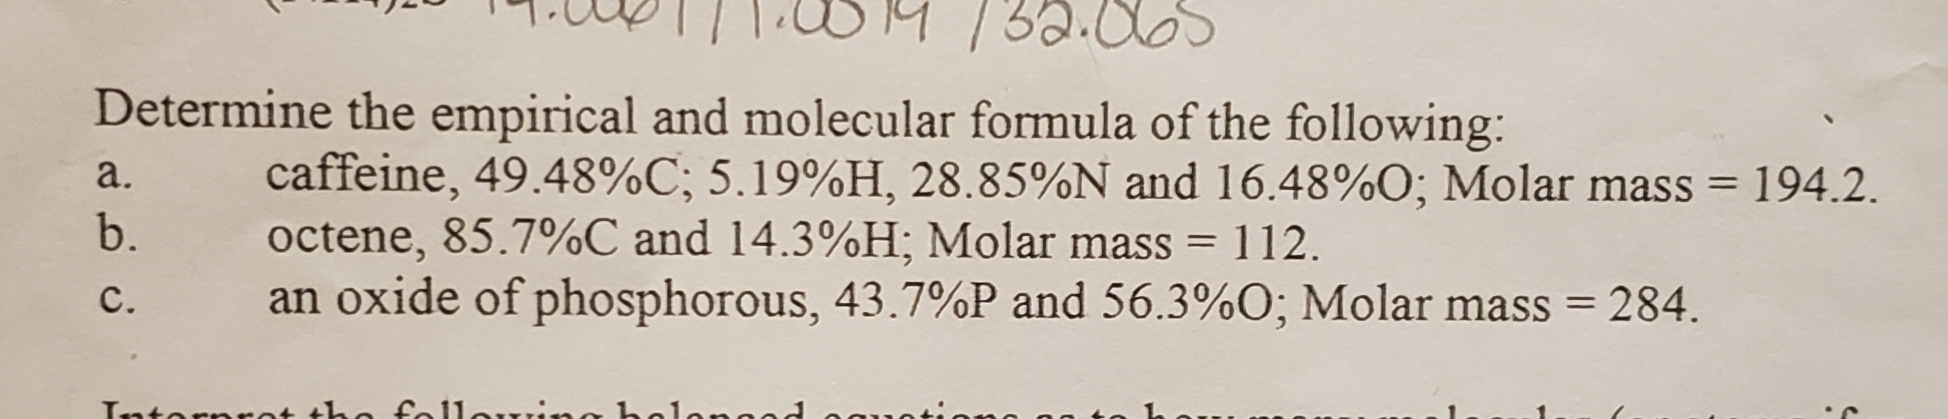 Determine the empirical and molecular formula of the following:
a. caffeine, 49.48%C: 5.19%H, 28.85%N and 16.48960; Molar mass- 194.2.
b. octene, 85.7%C and 14.3%H, Molar mass-112.
c, an oxide of phosphorous, 43.7%P and 56.3%0; Molar mass- 284.
